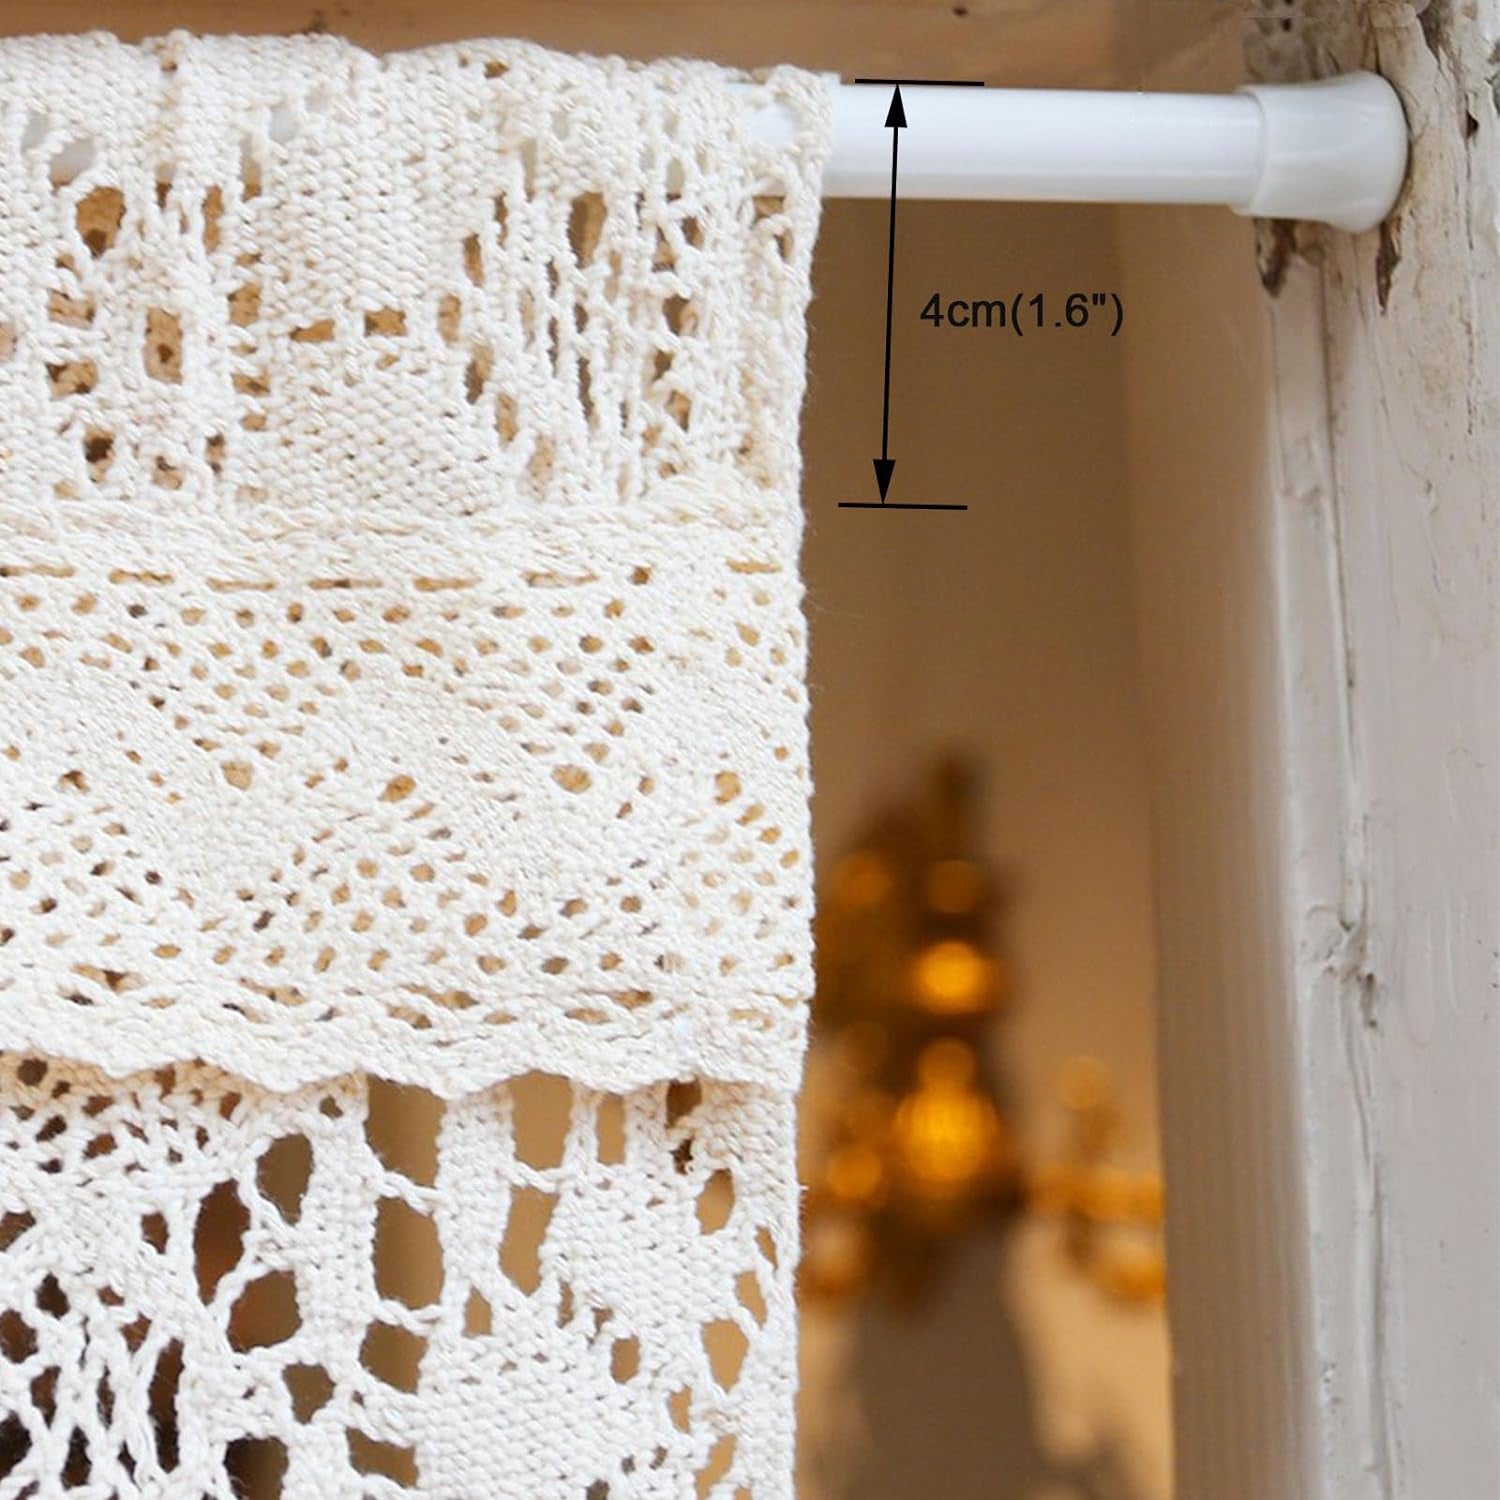 Boho Crochet Curtain Valance for Kitchen Window Retro Rustic Cotton Lace Sheer Short Curtains Farmhouse Vintage Rod Pocket with Tassels for Bathroom Cafe Decor,1 Panel 22"×16"